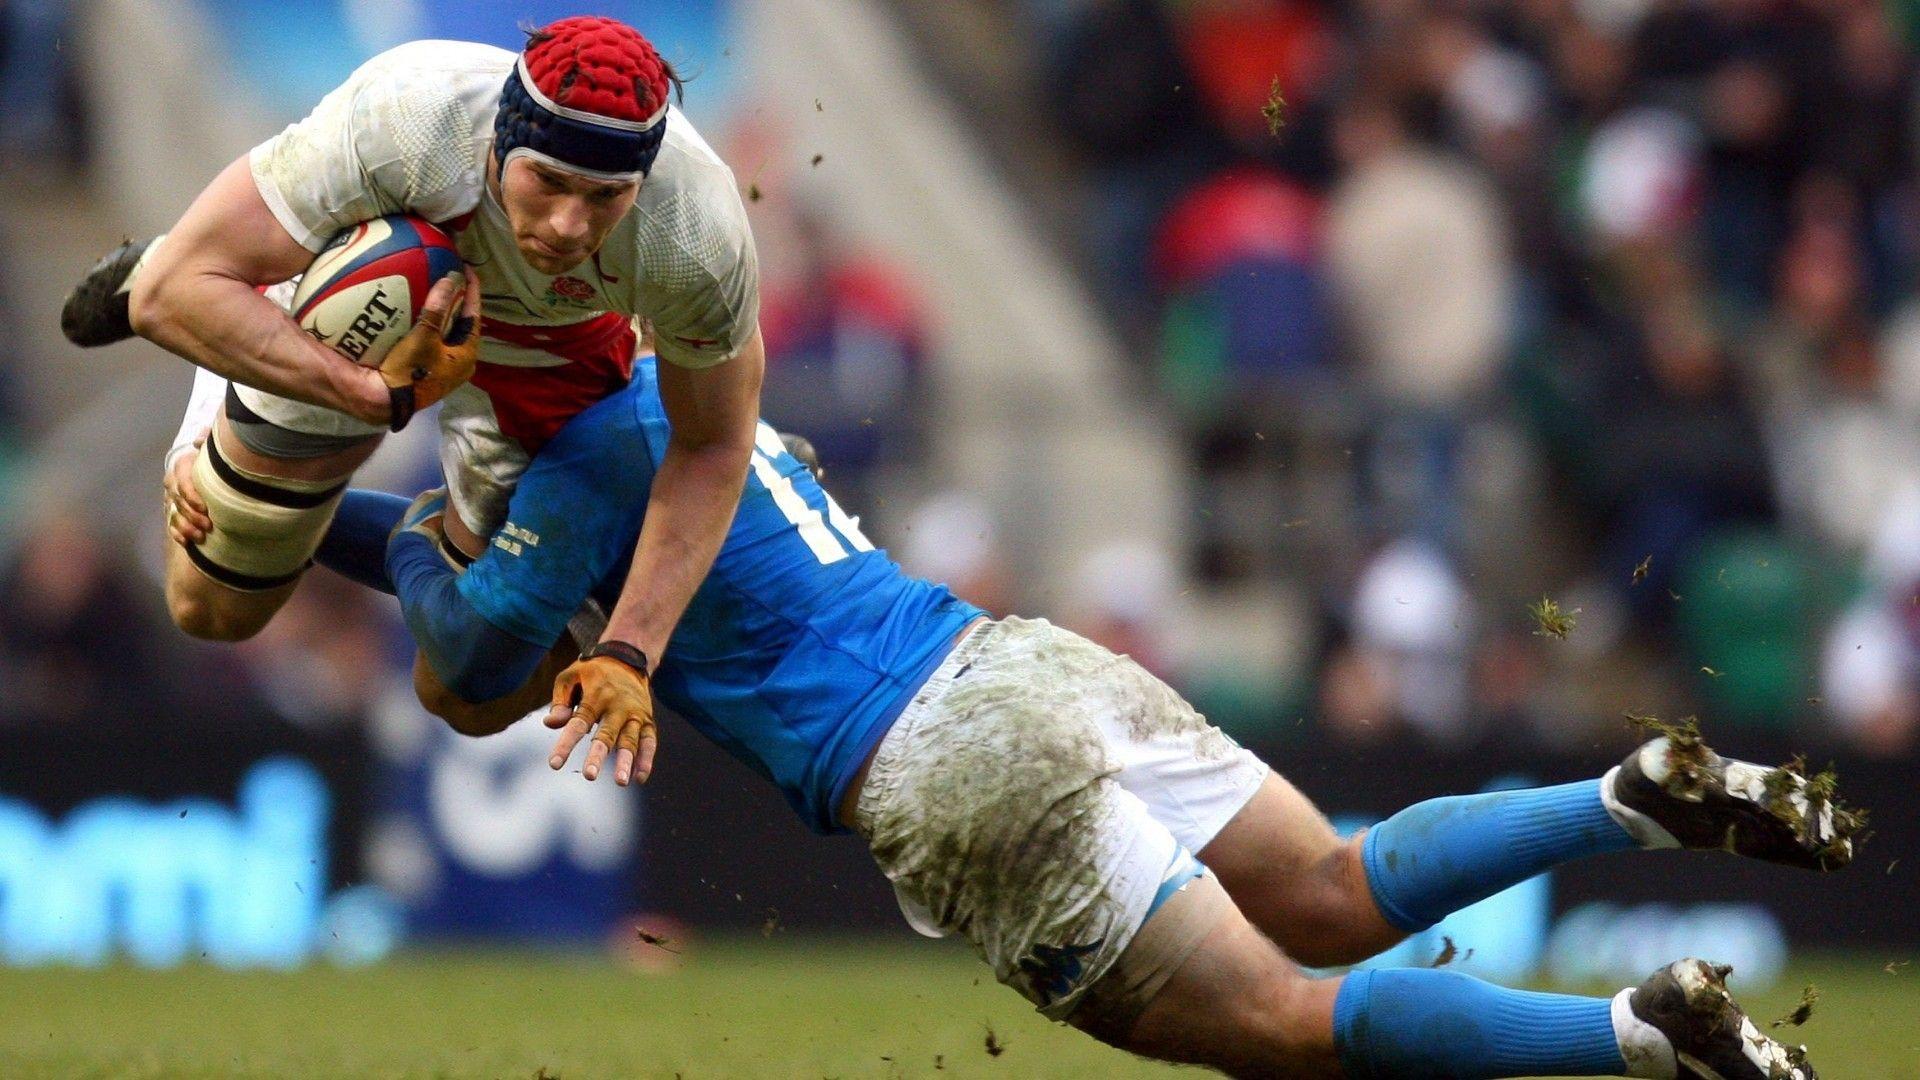 italia-galles-pronostici-scommesse-giocate-online-rugby-sei-nazioni-2021-Betaland-TheClover